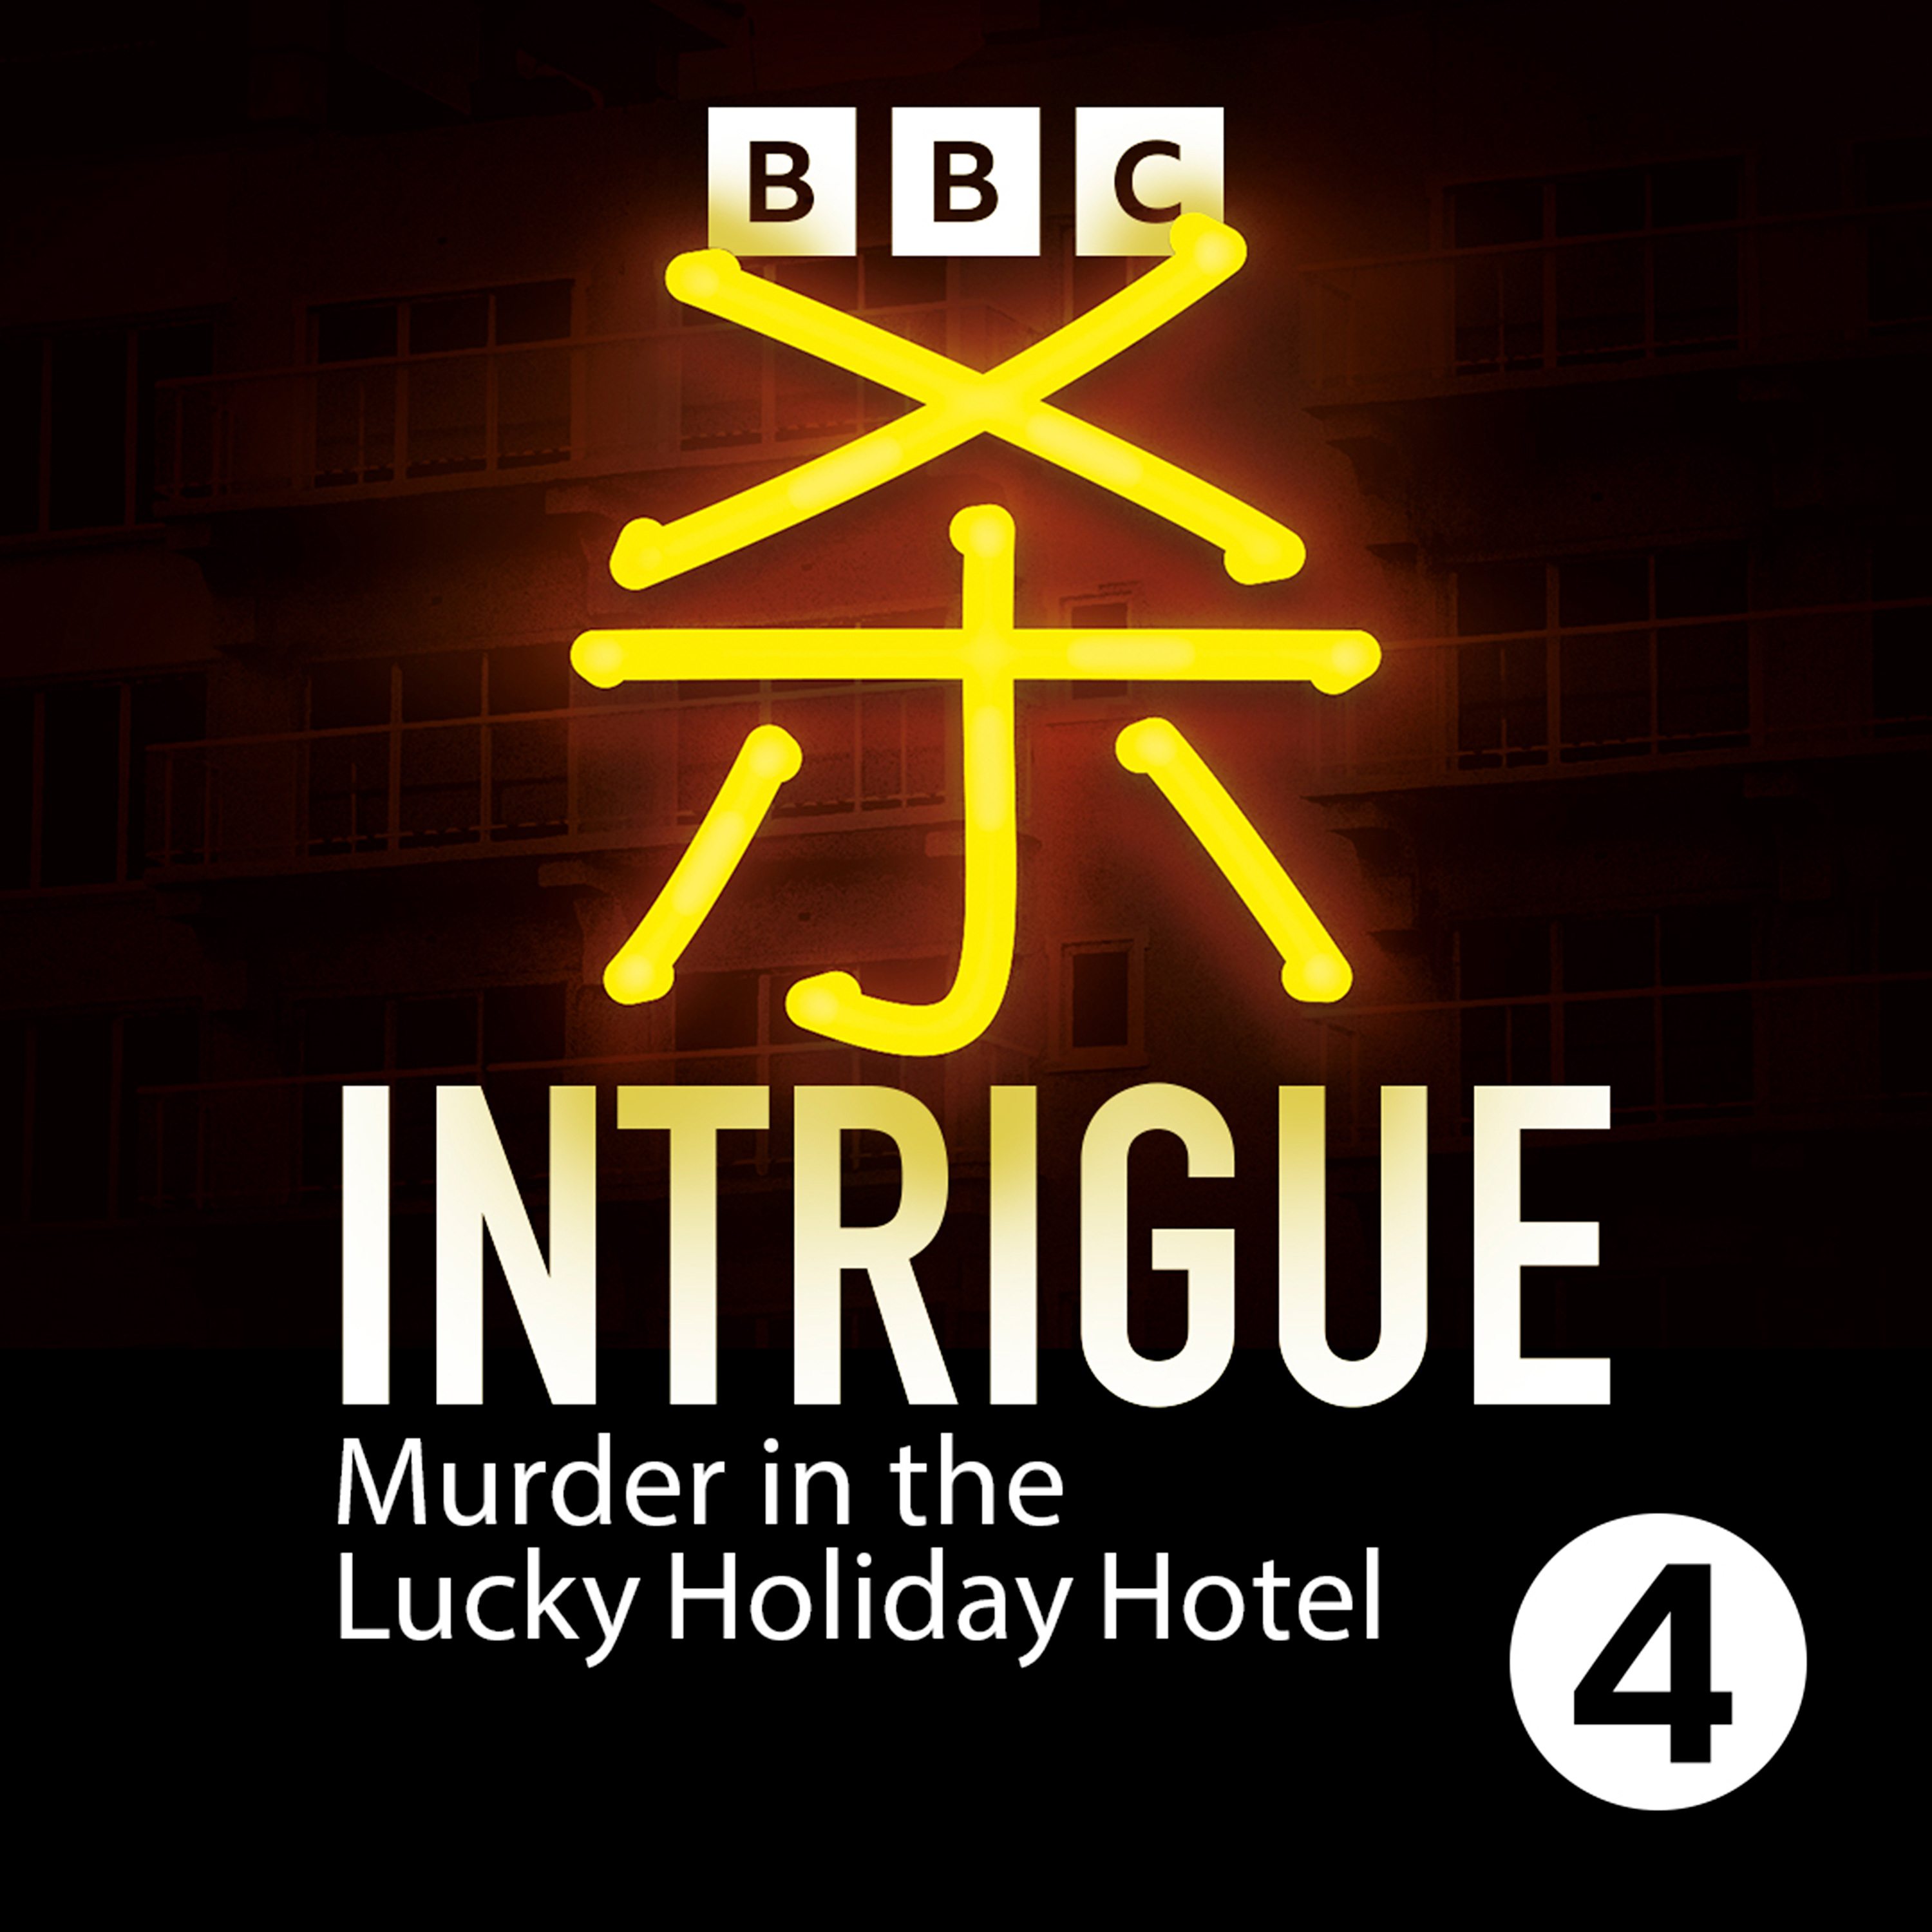 Murder in the Lucky Holiday Hotel - Episode 1